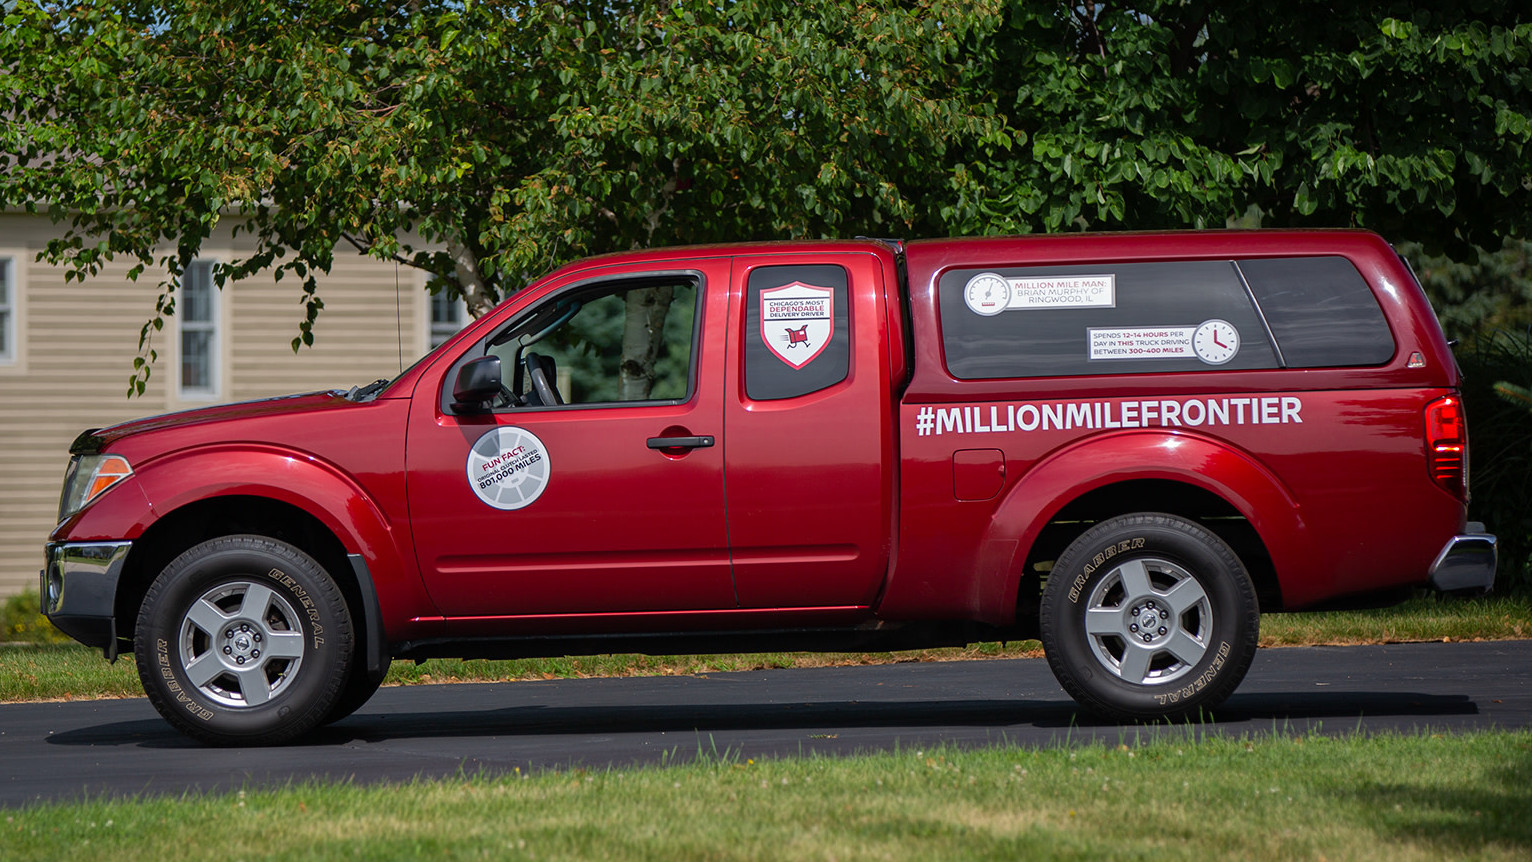 Million-Kilometre Nissan Frontier Traded In For Nearly Identical Truck 13 Years Later